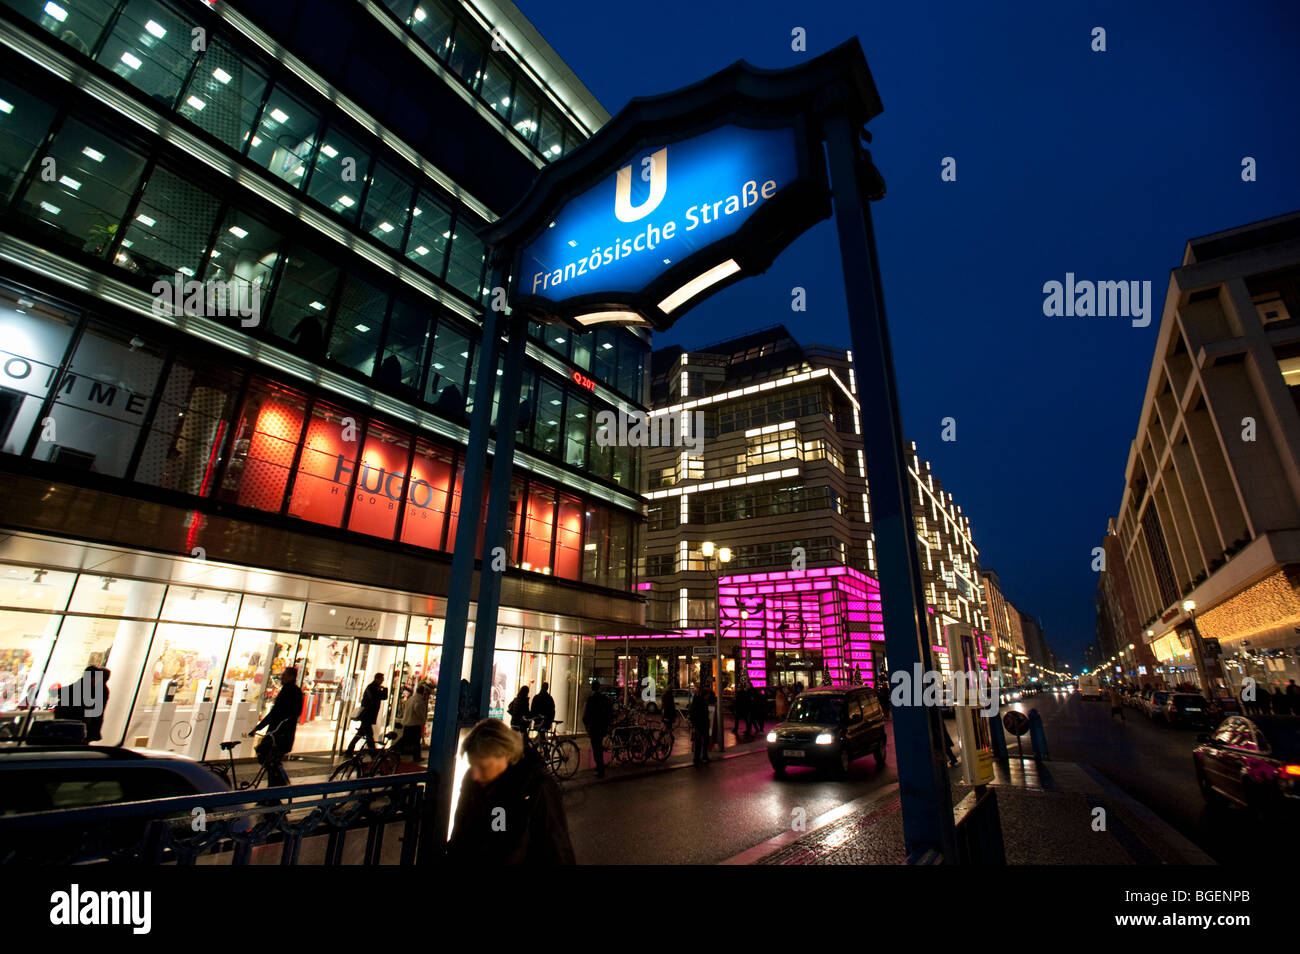 View of Friedrichstrasse at night at entrance to Franzosische Strasse subway ststion in Mitte Berlin Germany Stock Photo